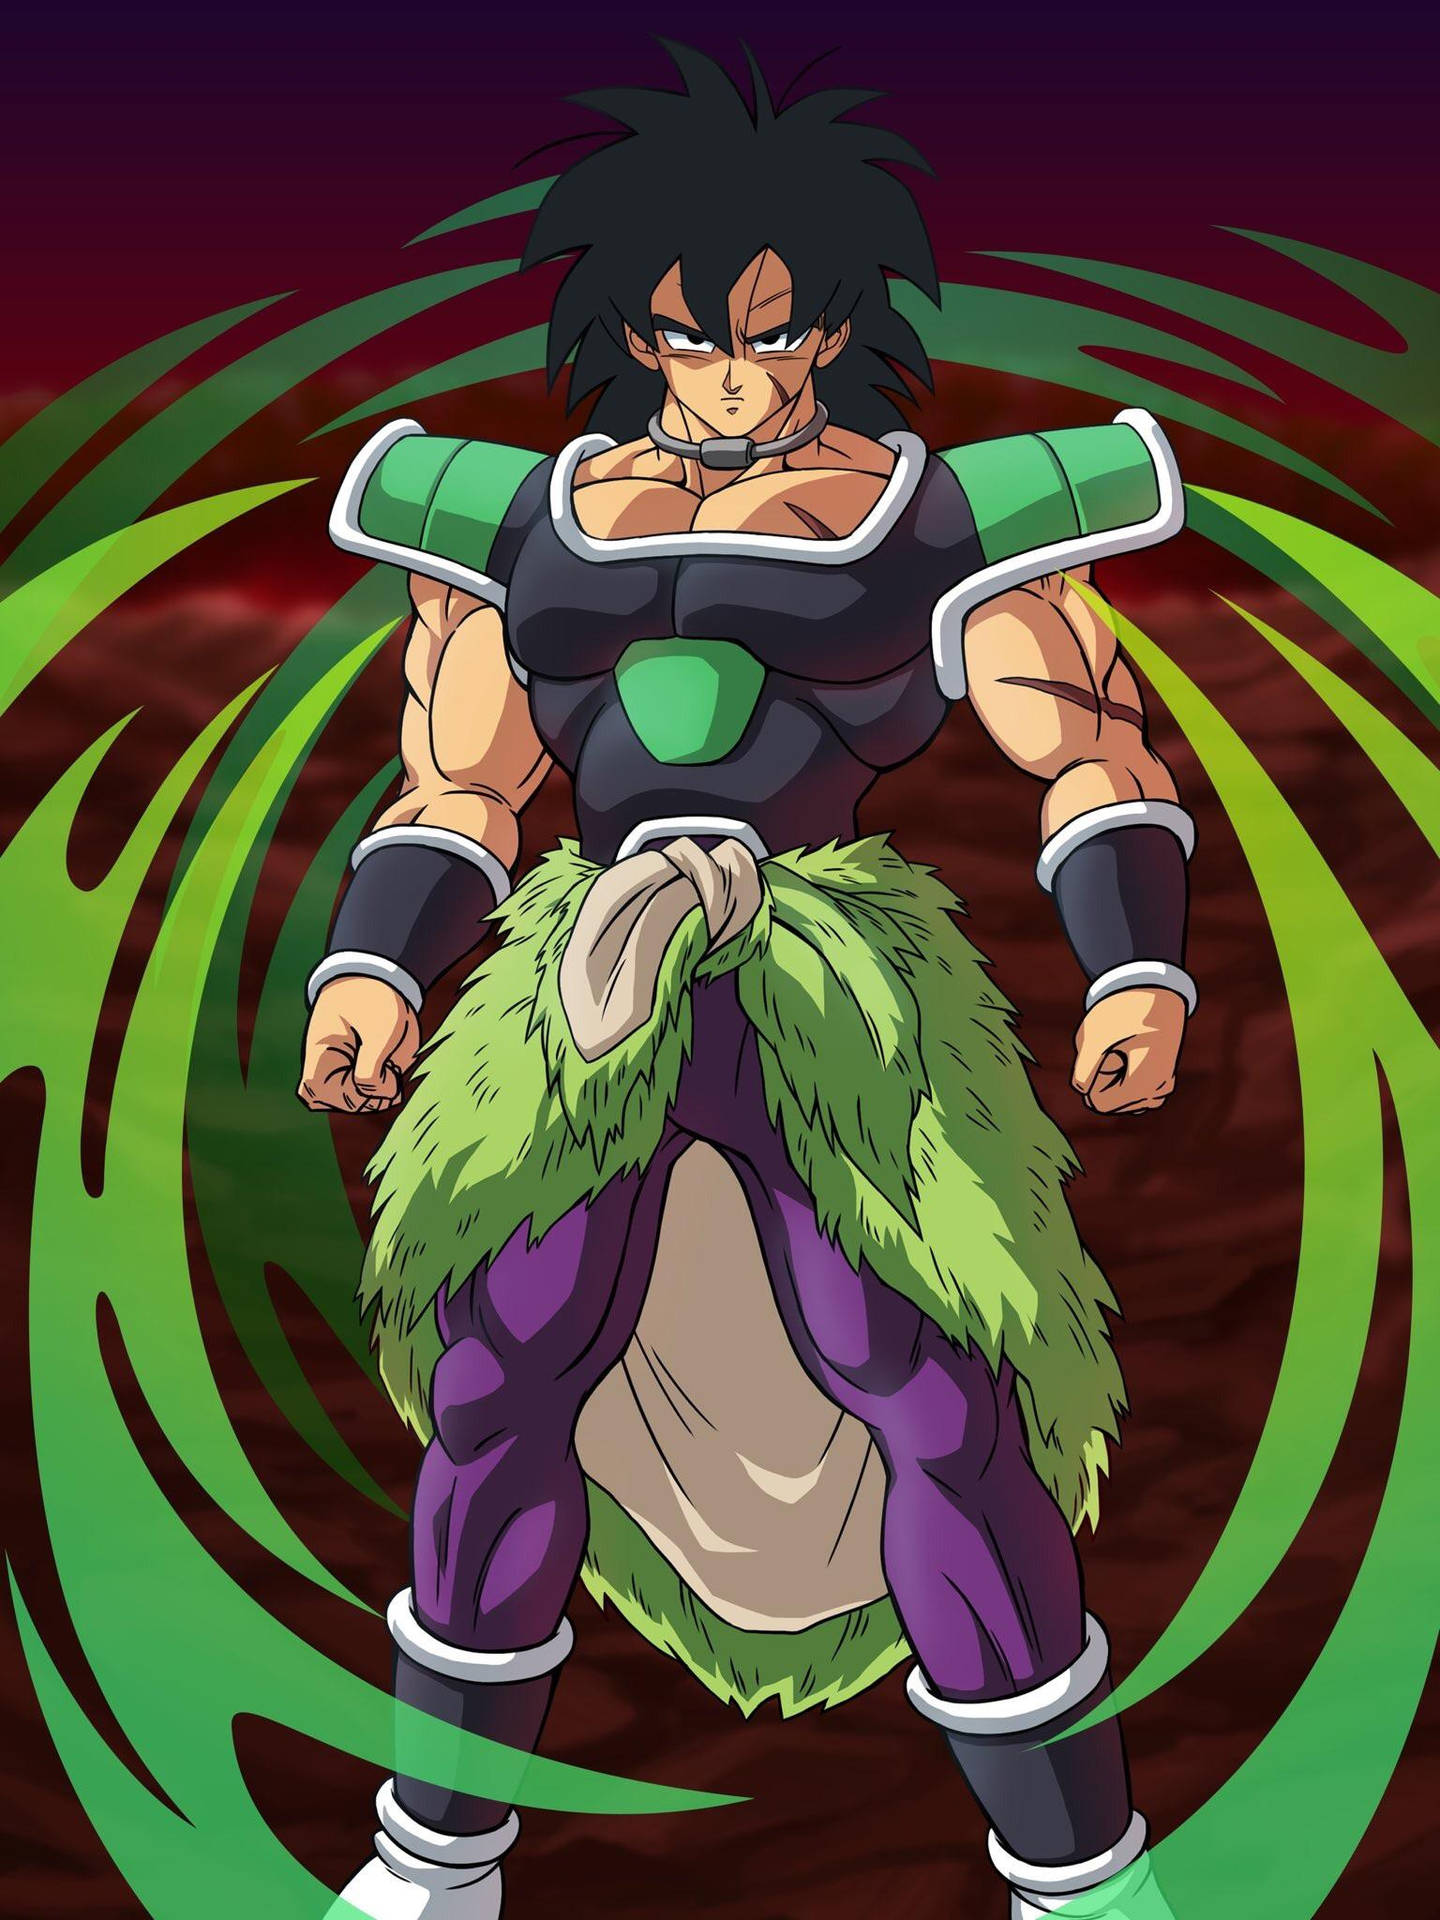 "The fierce warrior Broly ready to face his next enemy." Wallpaper